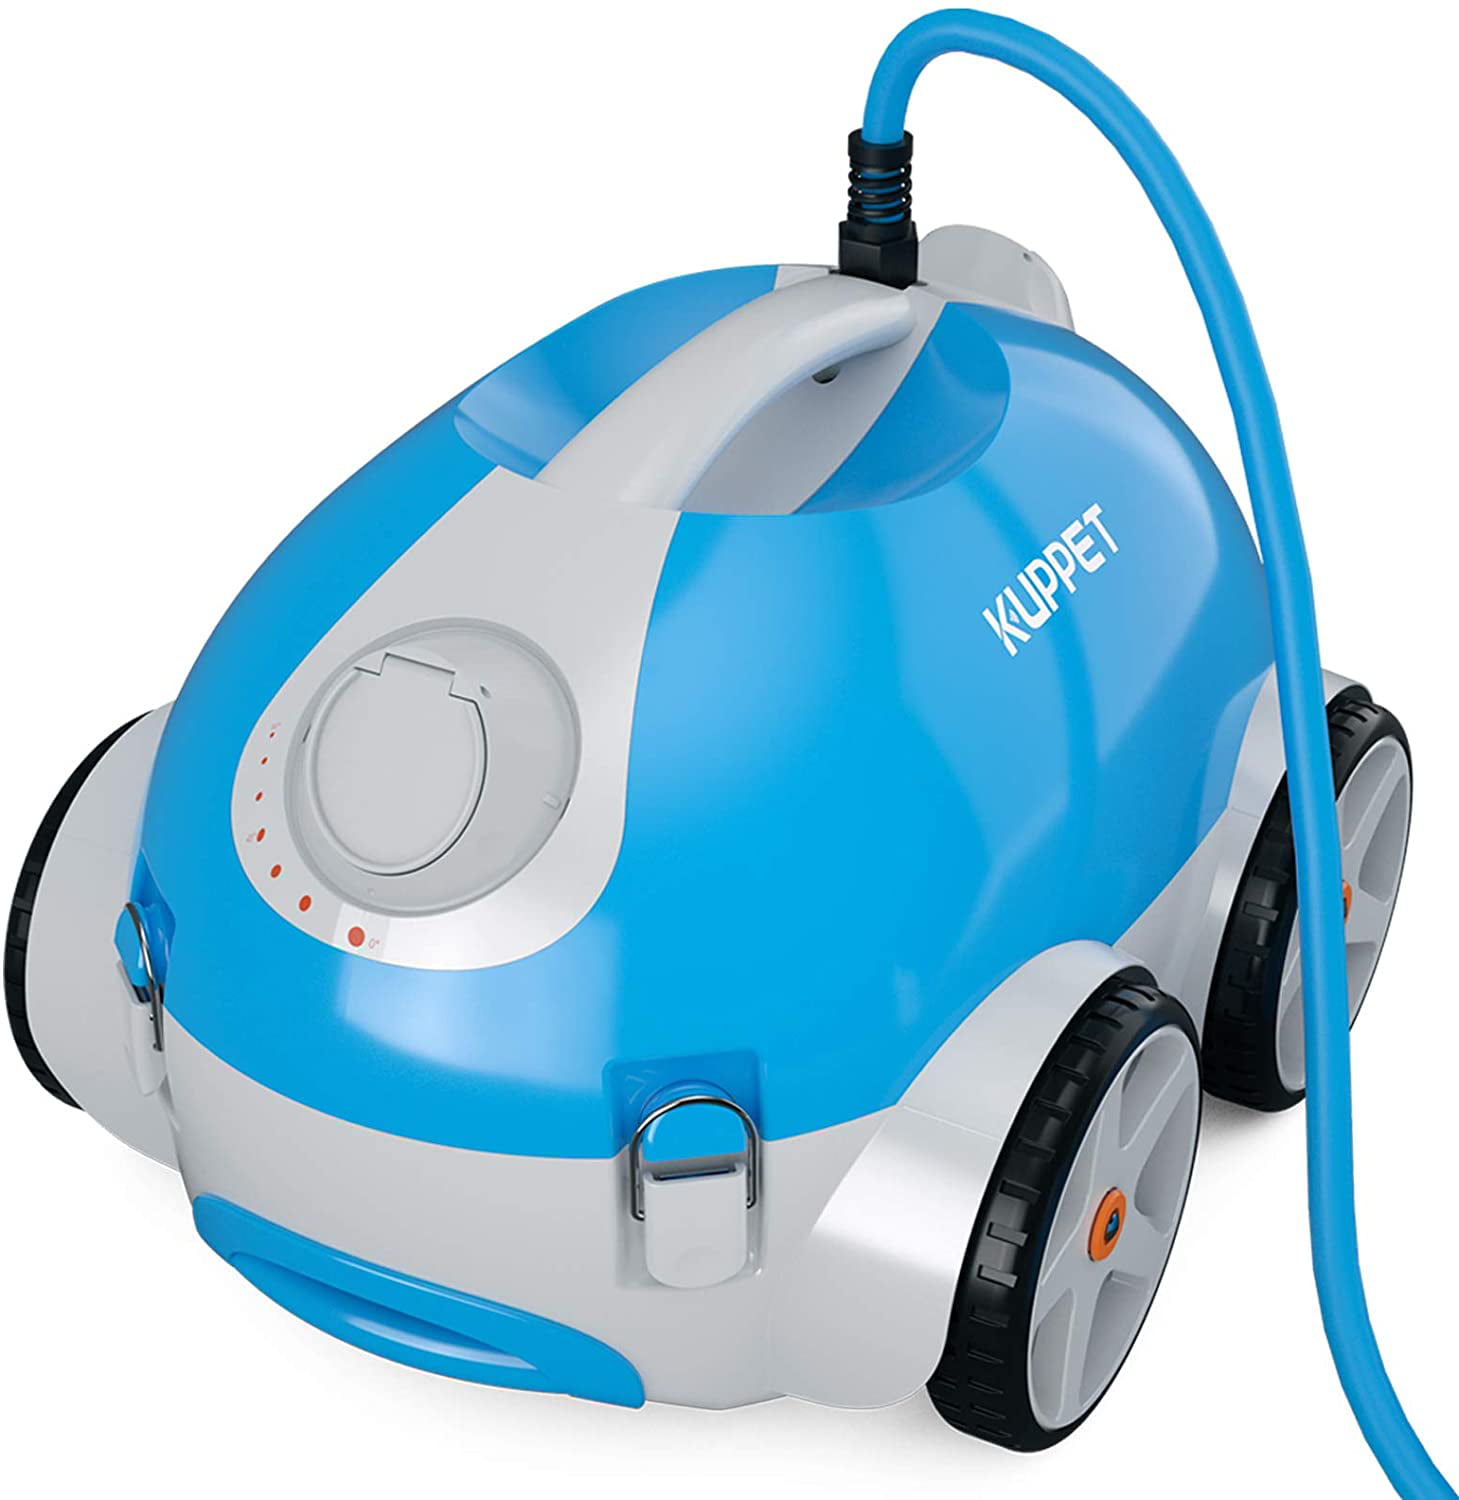 Ideal for Small Pools Spas and Hot Tubs Automatic Robotic Pool Cleaner with Removable Brush Plate and Build-in Rechargeable Lithium Battery KUPPET Hand-Held Pool Vacuum Cleaner